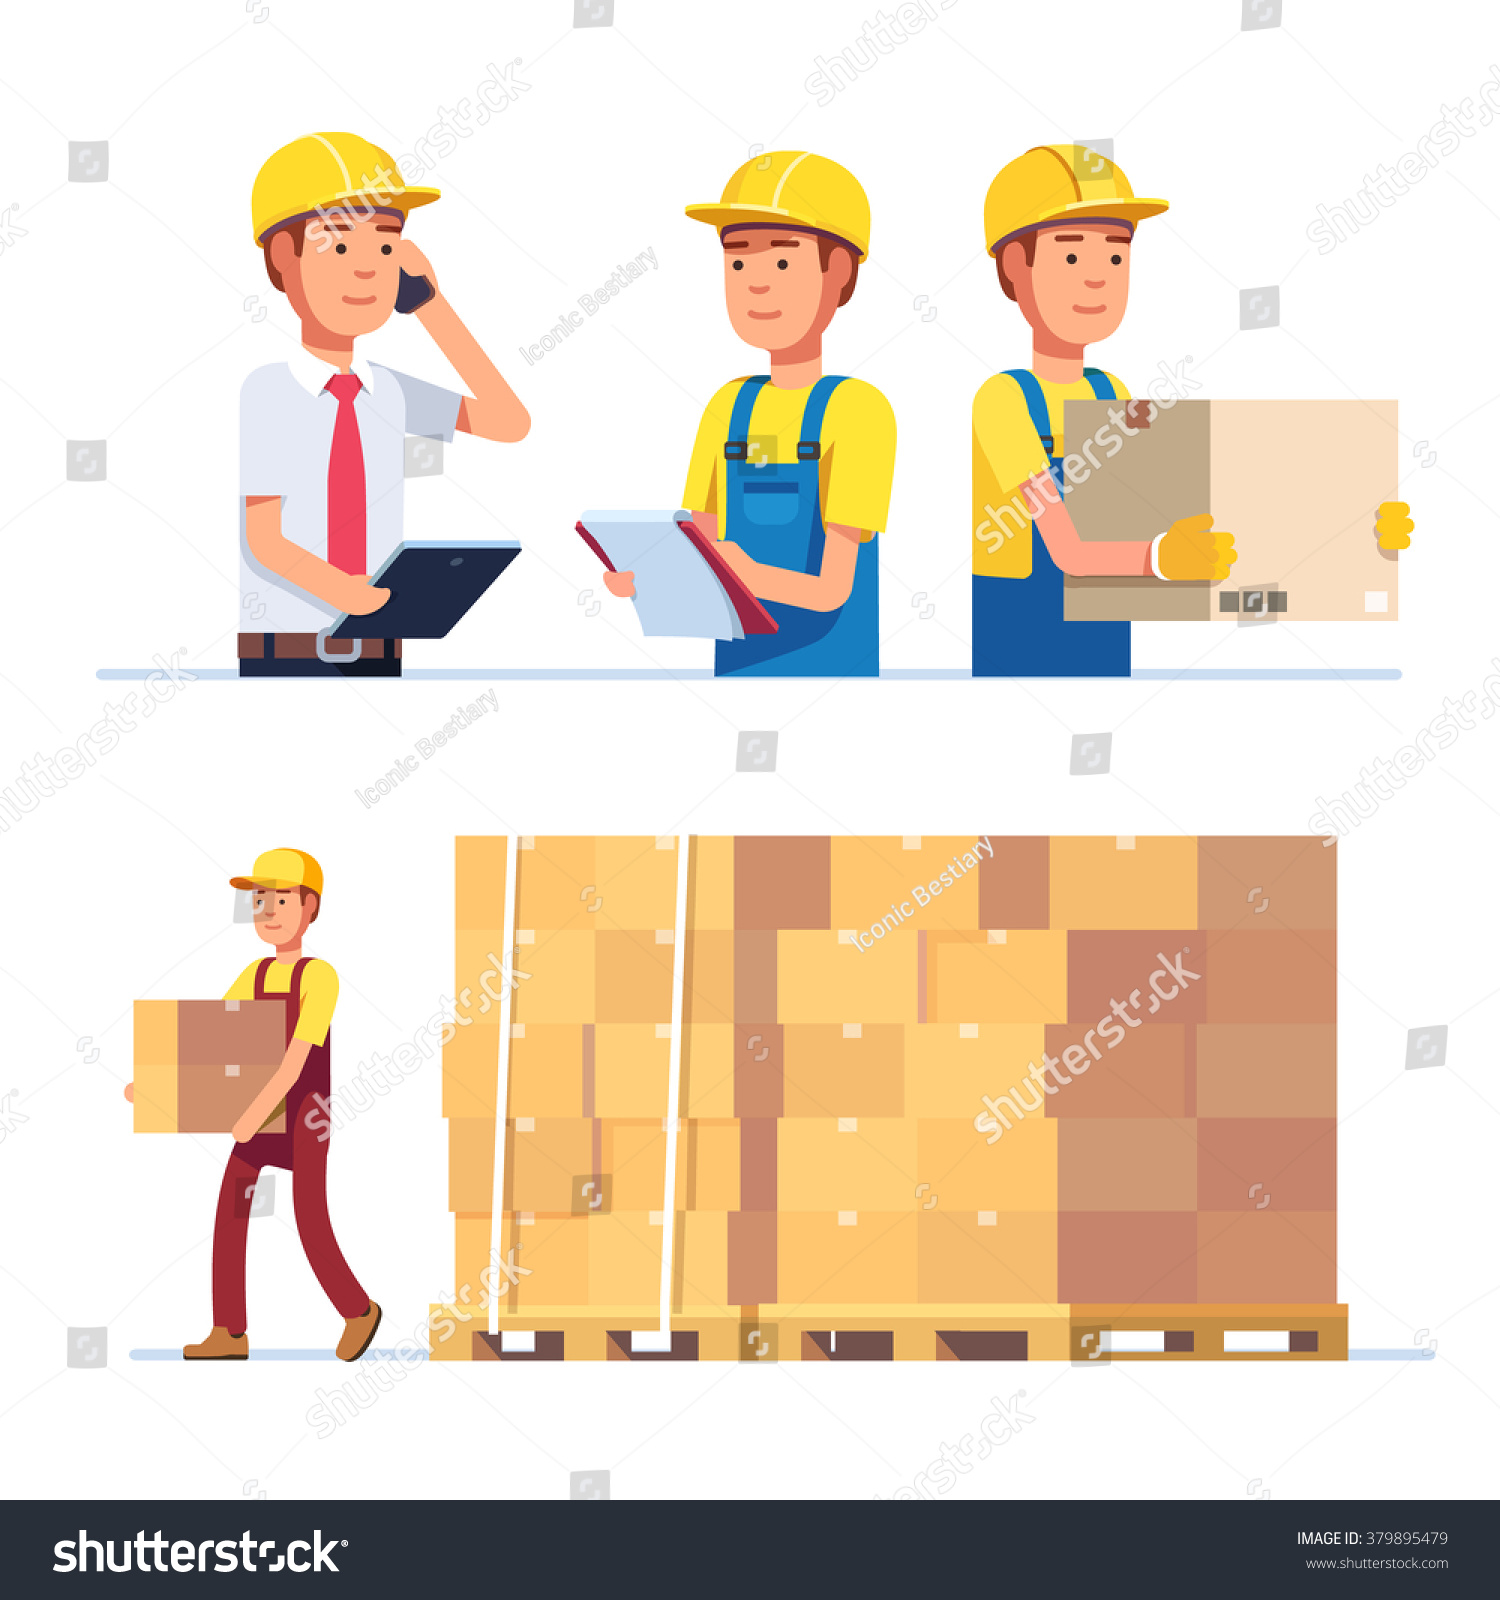 warehouse worker clipart free - photo #14